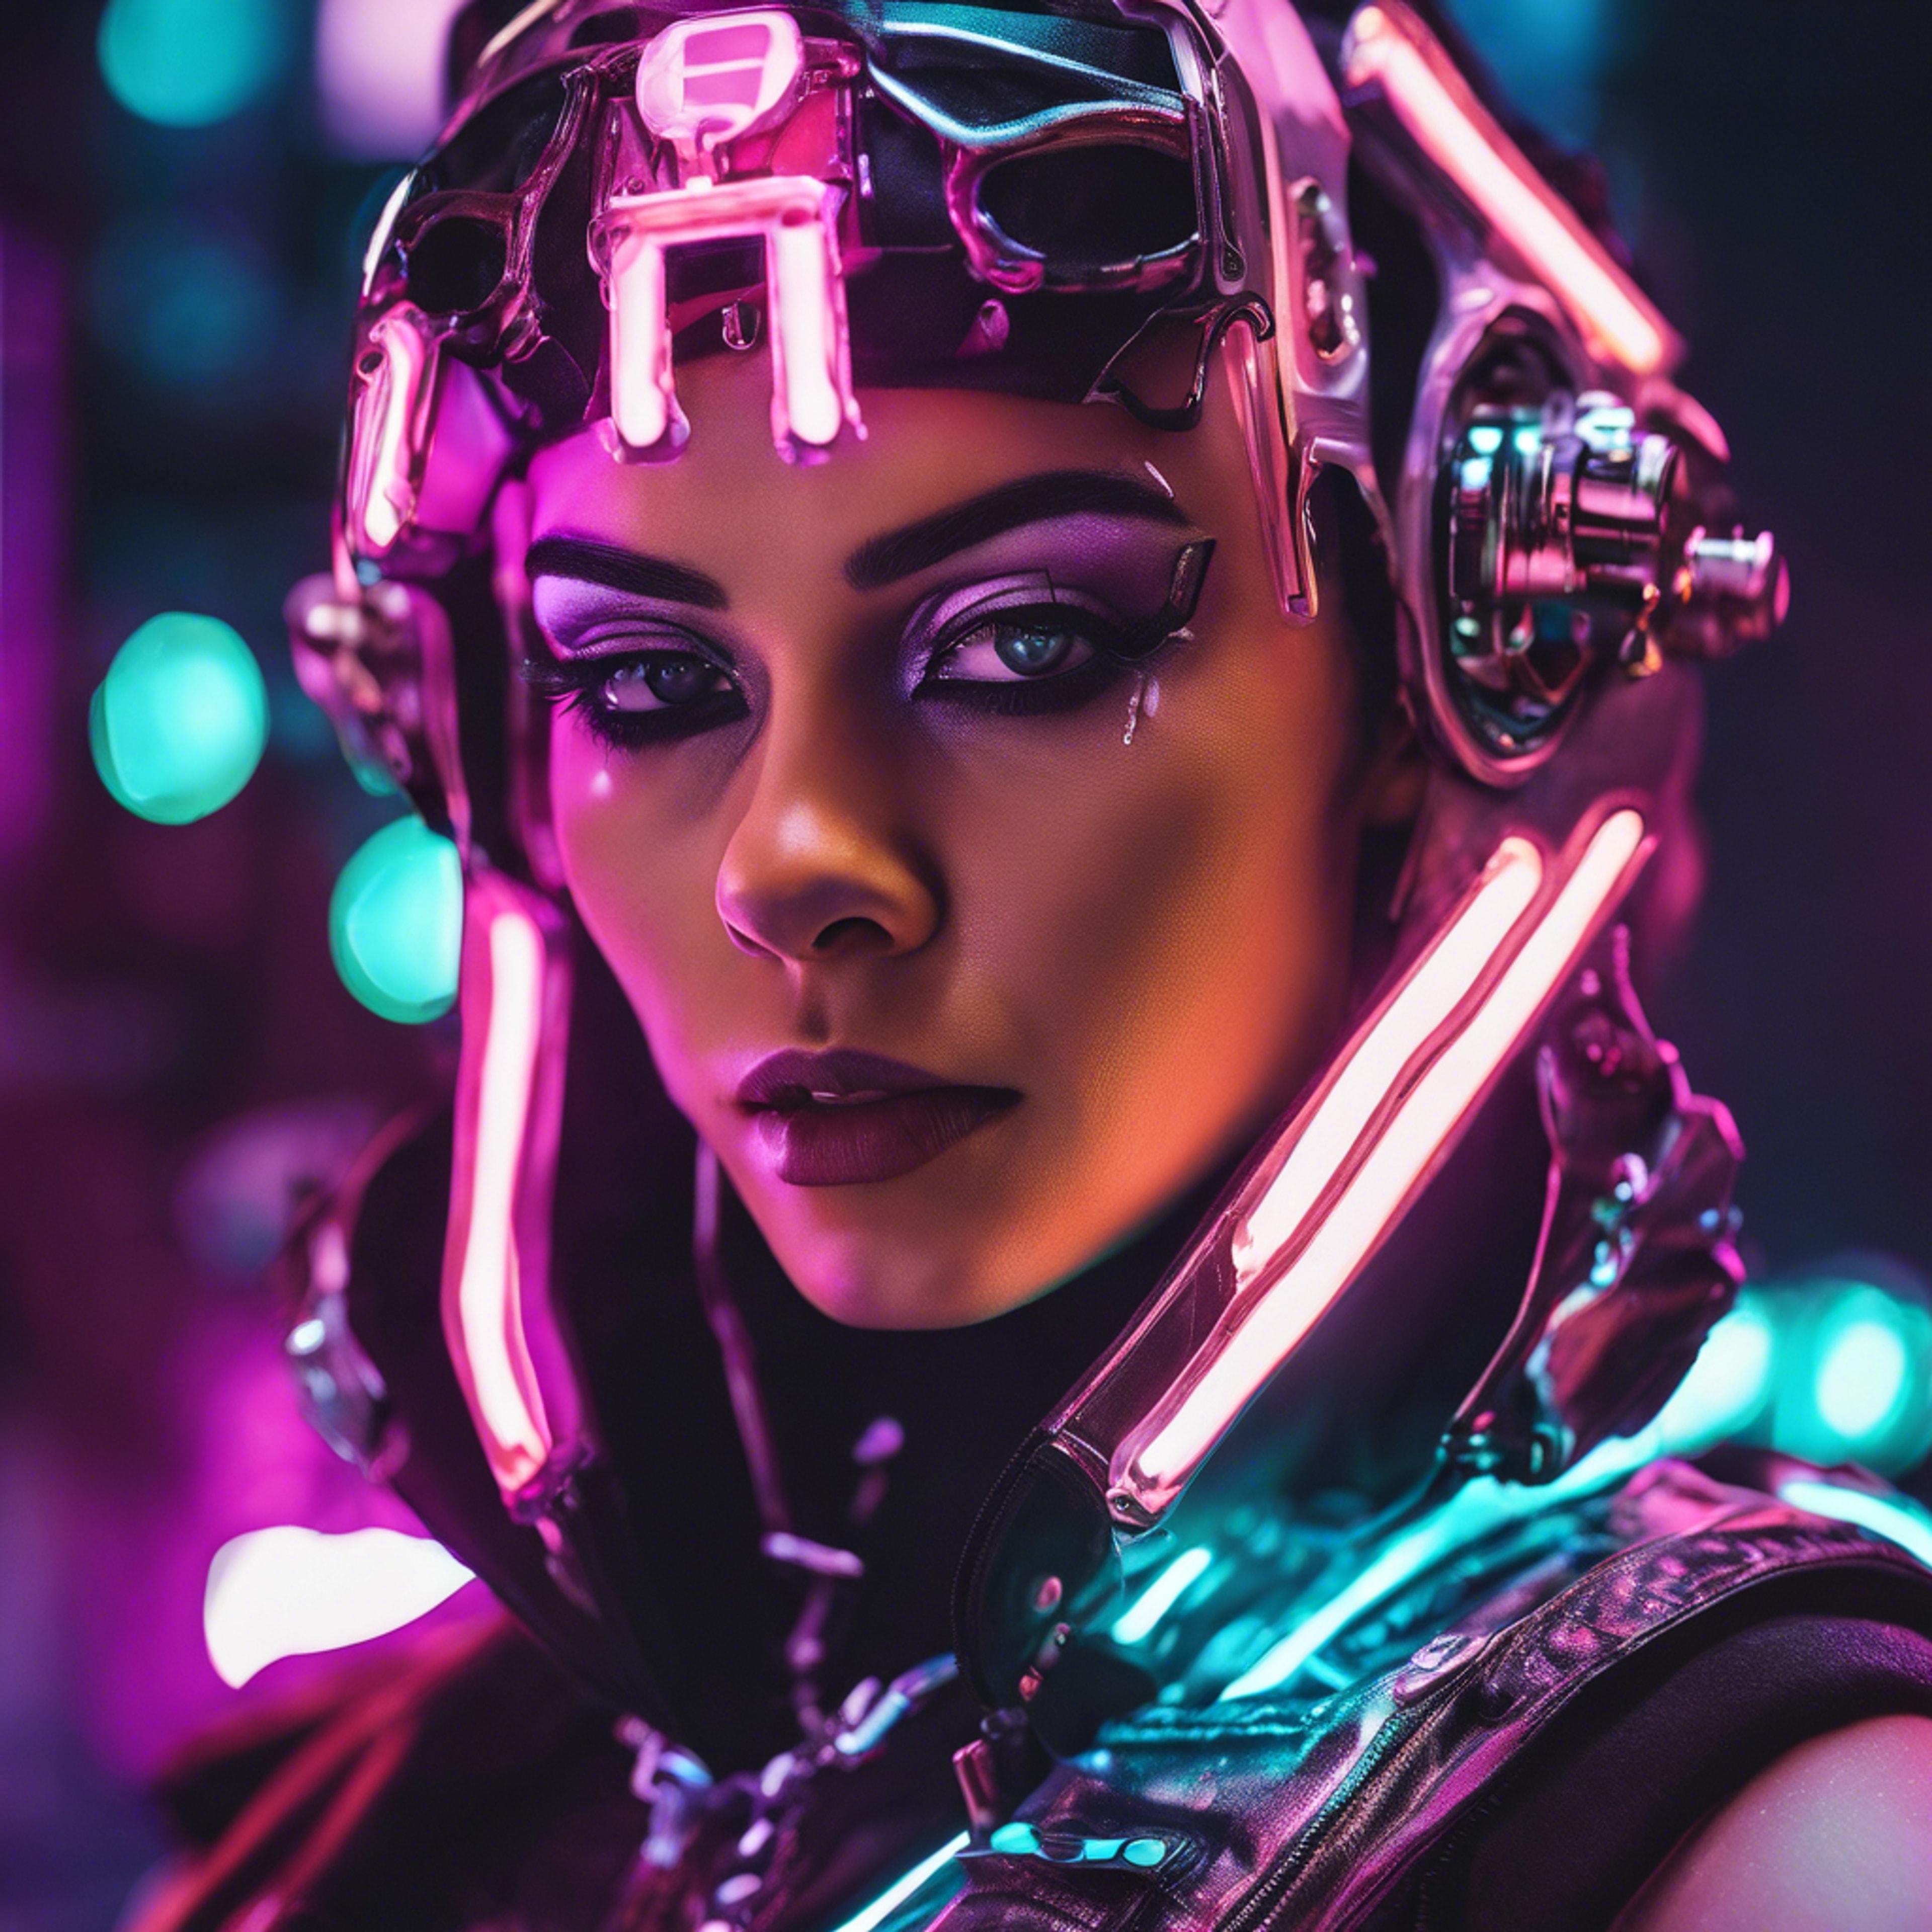 A close-up portrait of a cyberpunk baddie in neon lighting, metal piercings, and sci-fi-inspired makeup. 墙纸[9ac0123c92044077bebc]